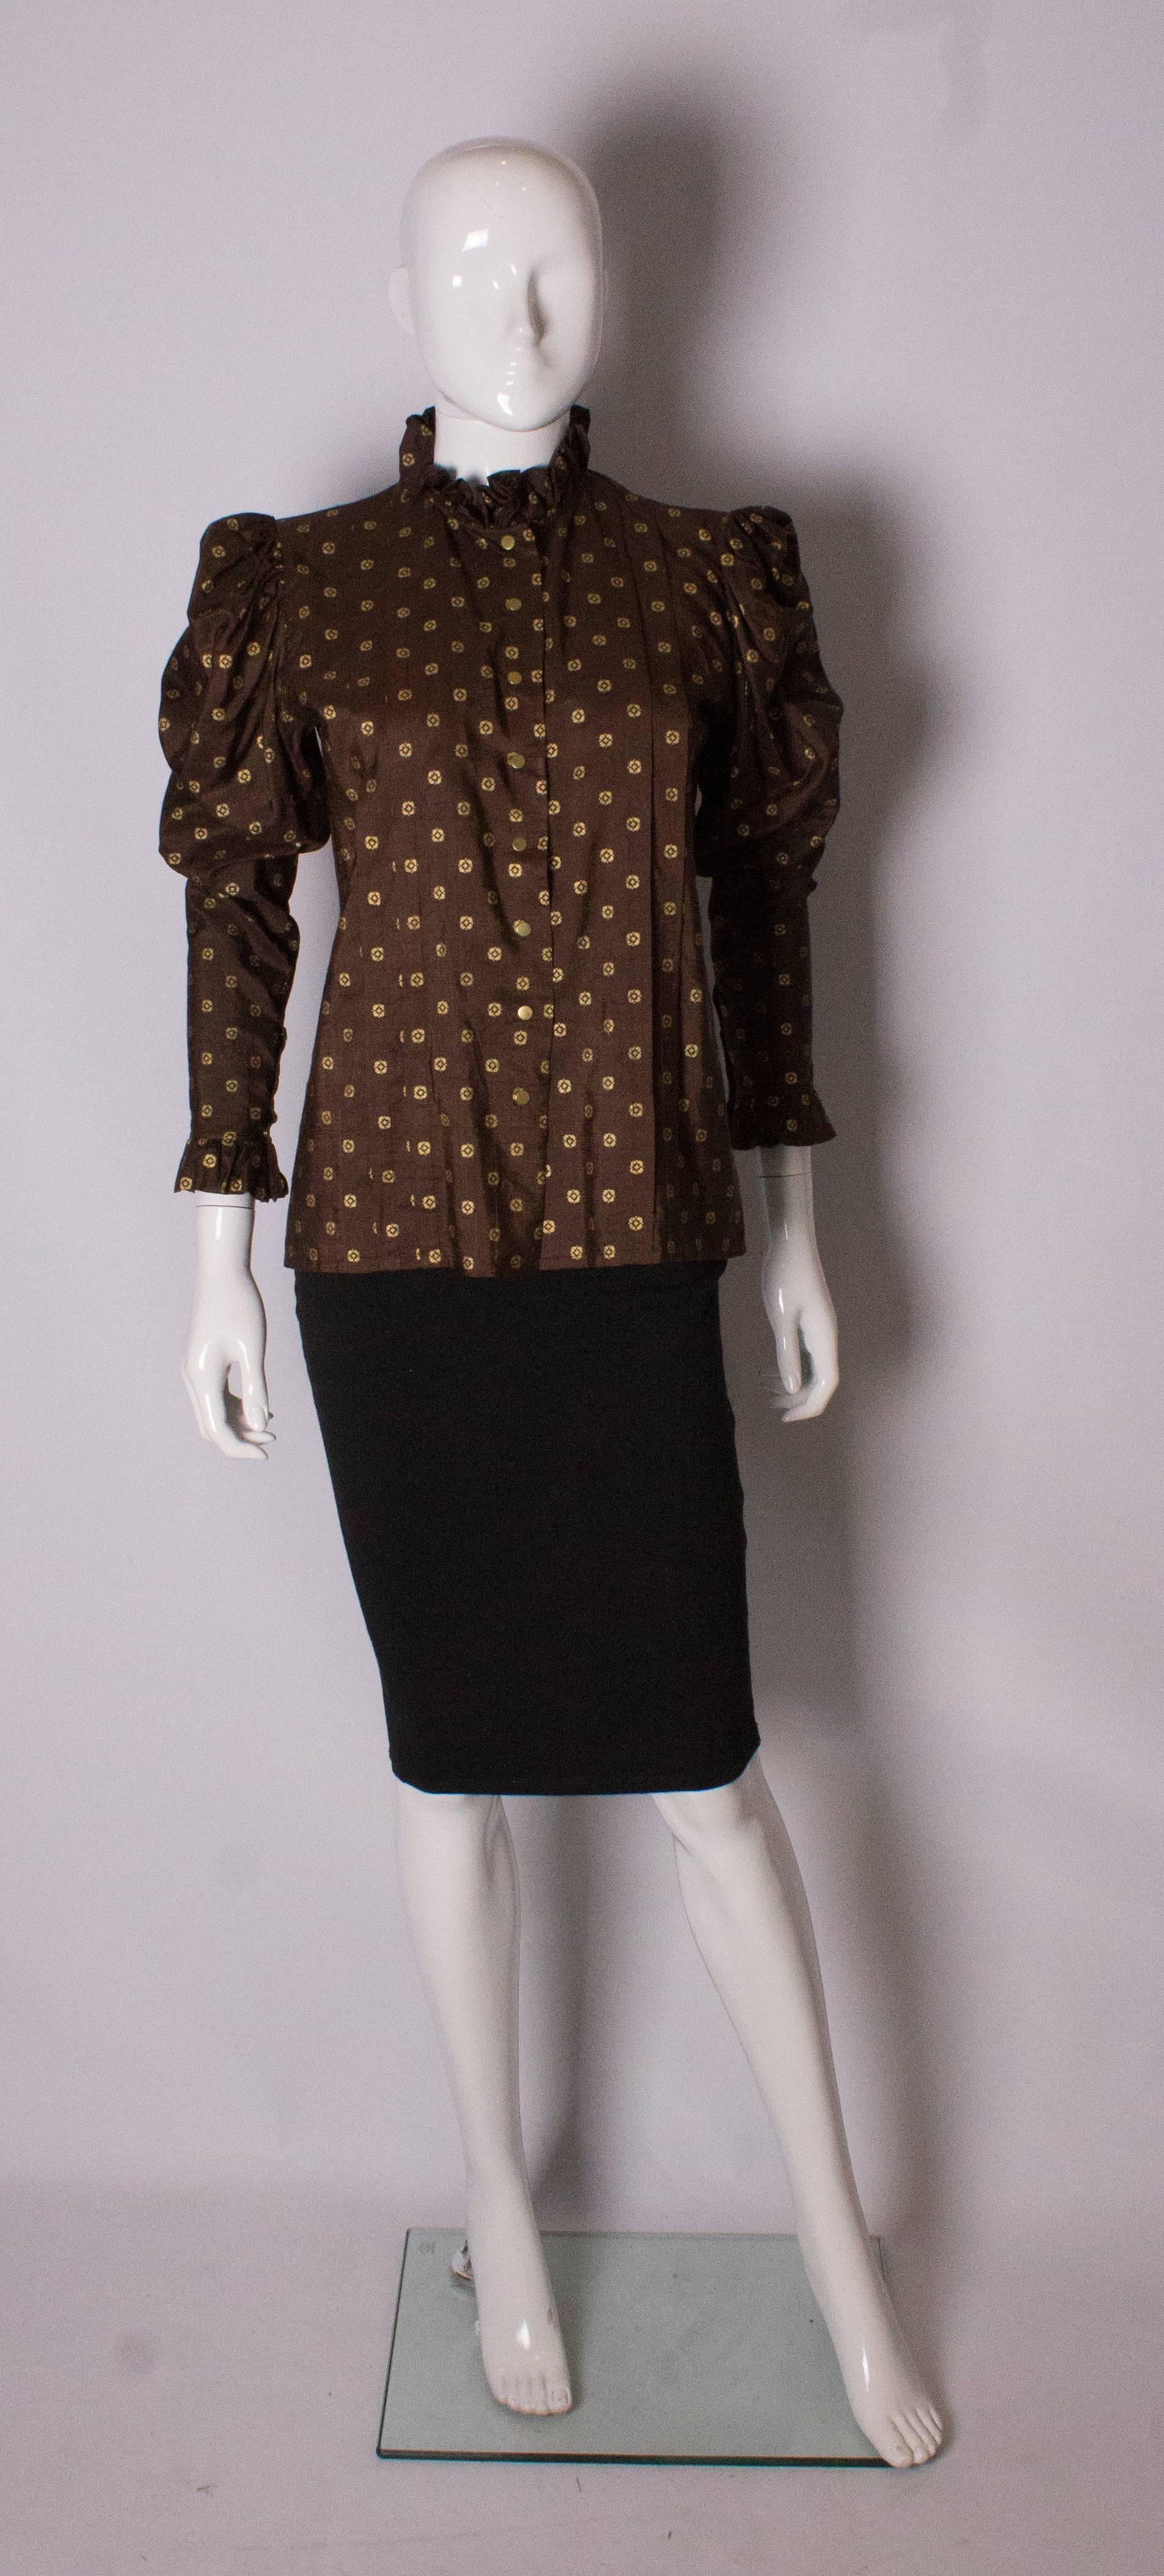 A stunning blouse, by Yves Saint Laurent Rive Gauche. The blouse is in brown silk with gold floral detail. It opens with gold poppers at the front and vertical pleats to either side.There is a frill at the neck and the cuffs, and gathering on the